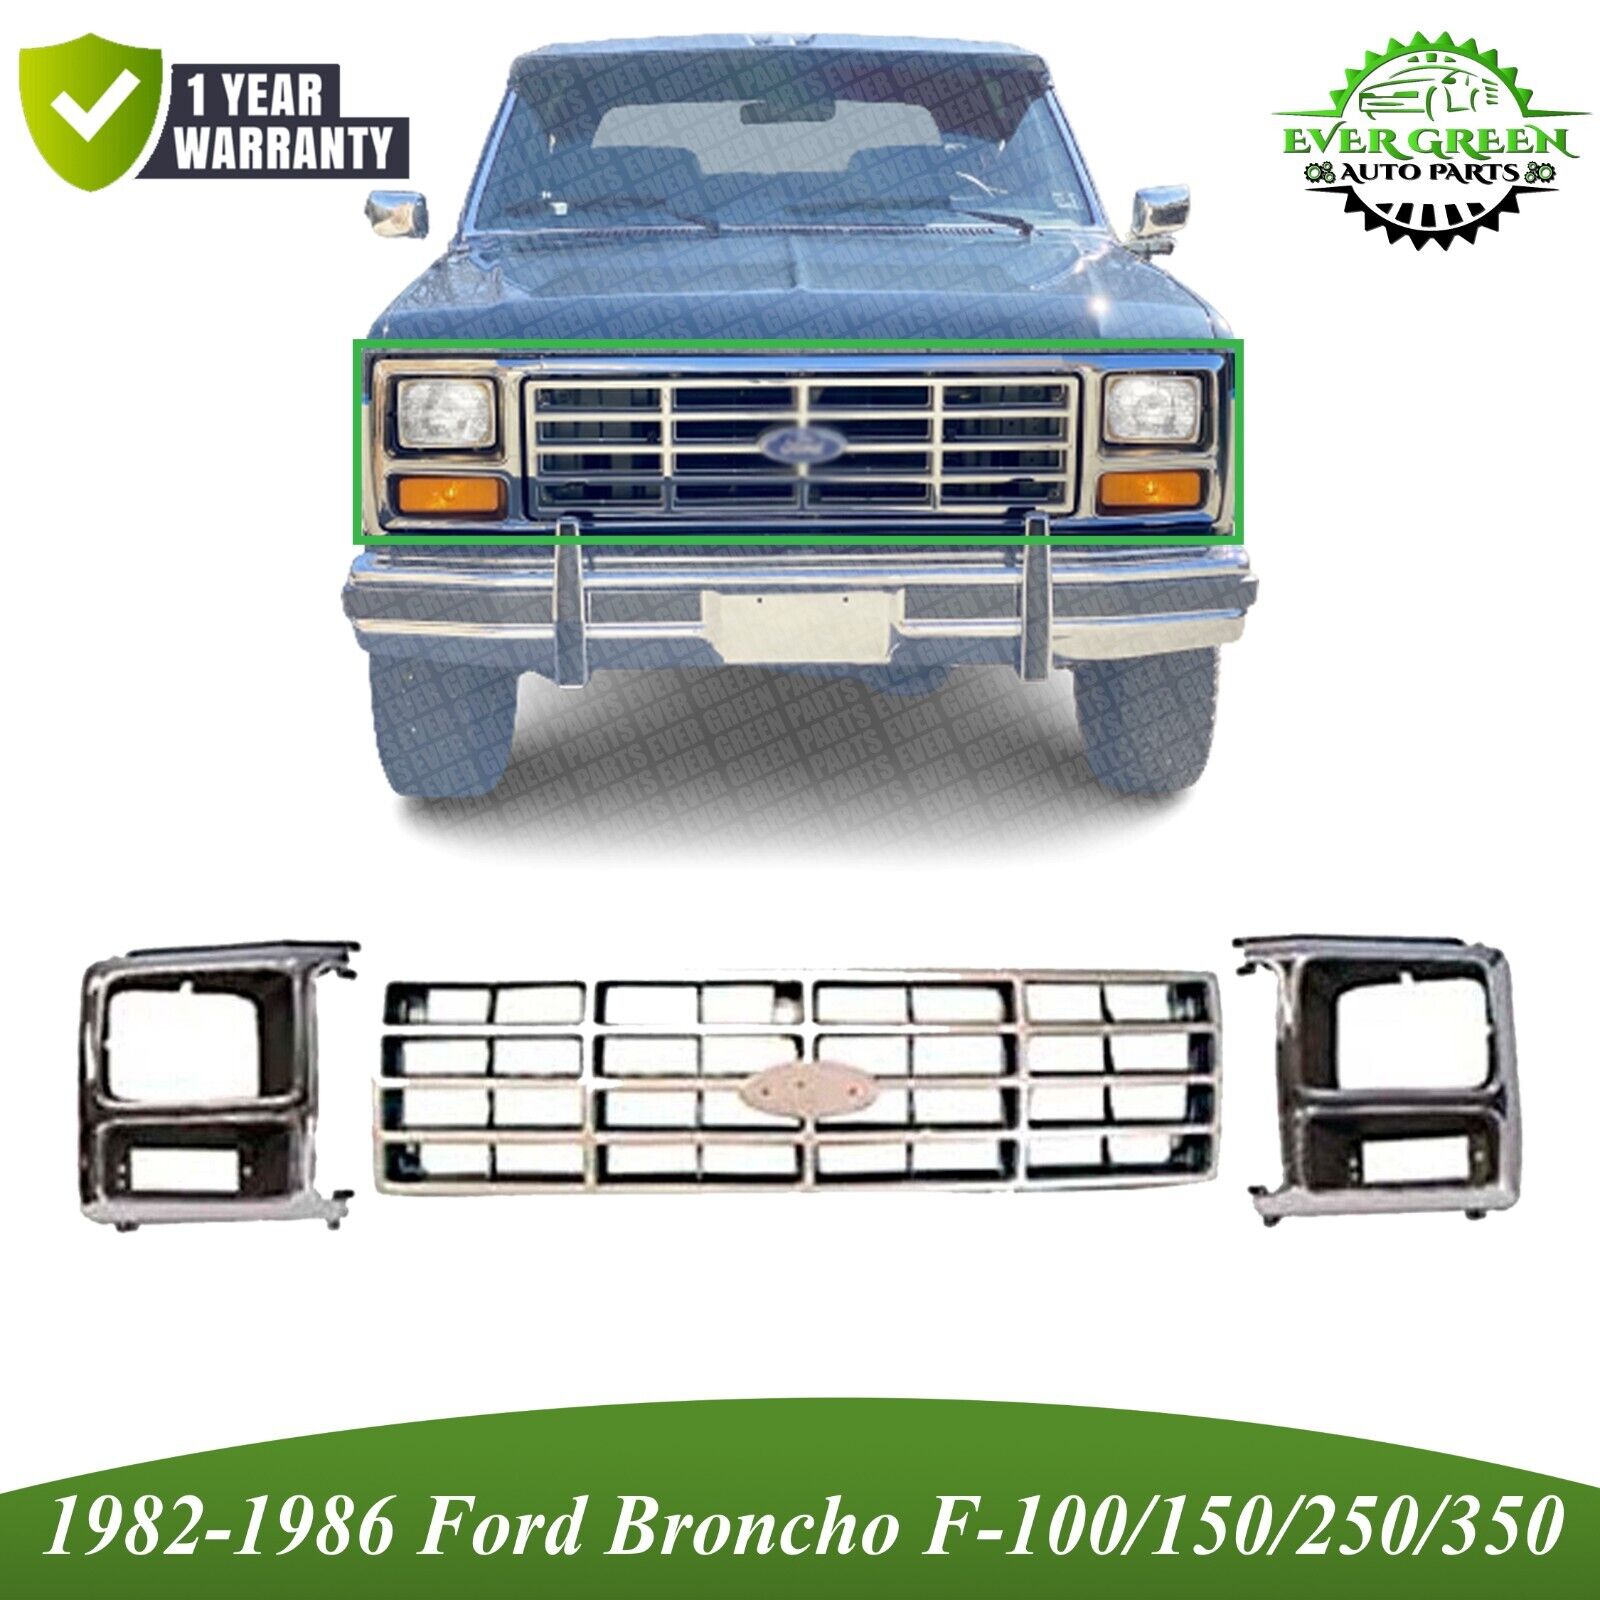 For 1982-1986 Ford F-150 F-250 F-350 Bronco Front Grille + Headlight Bezel Trim